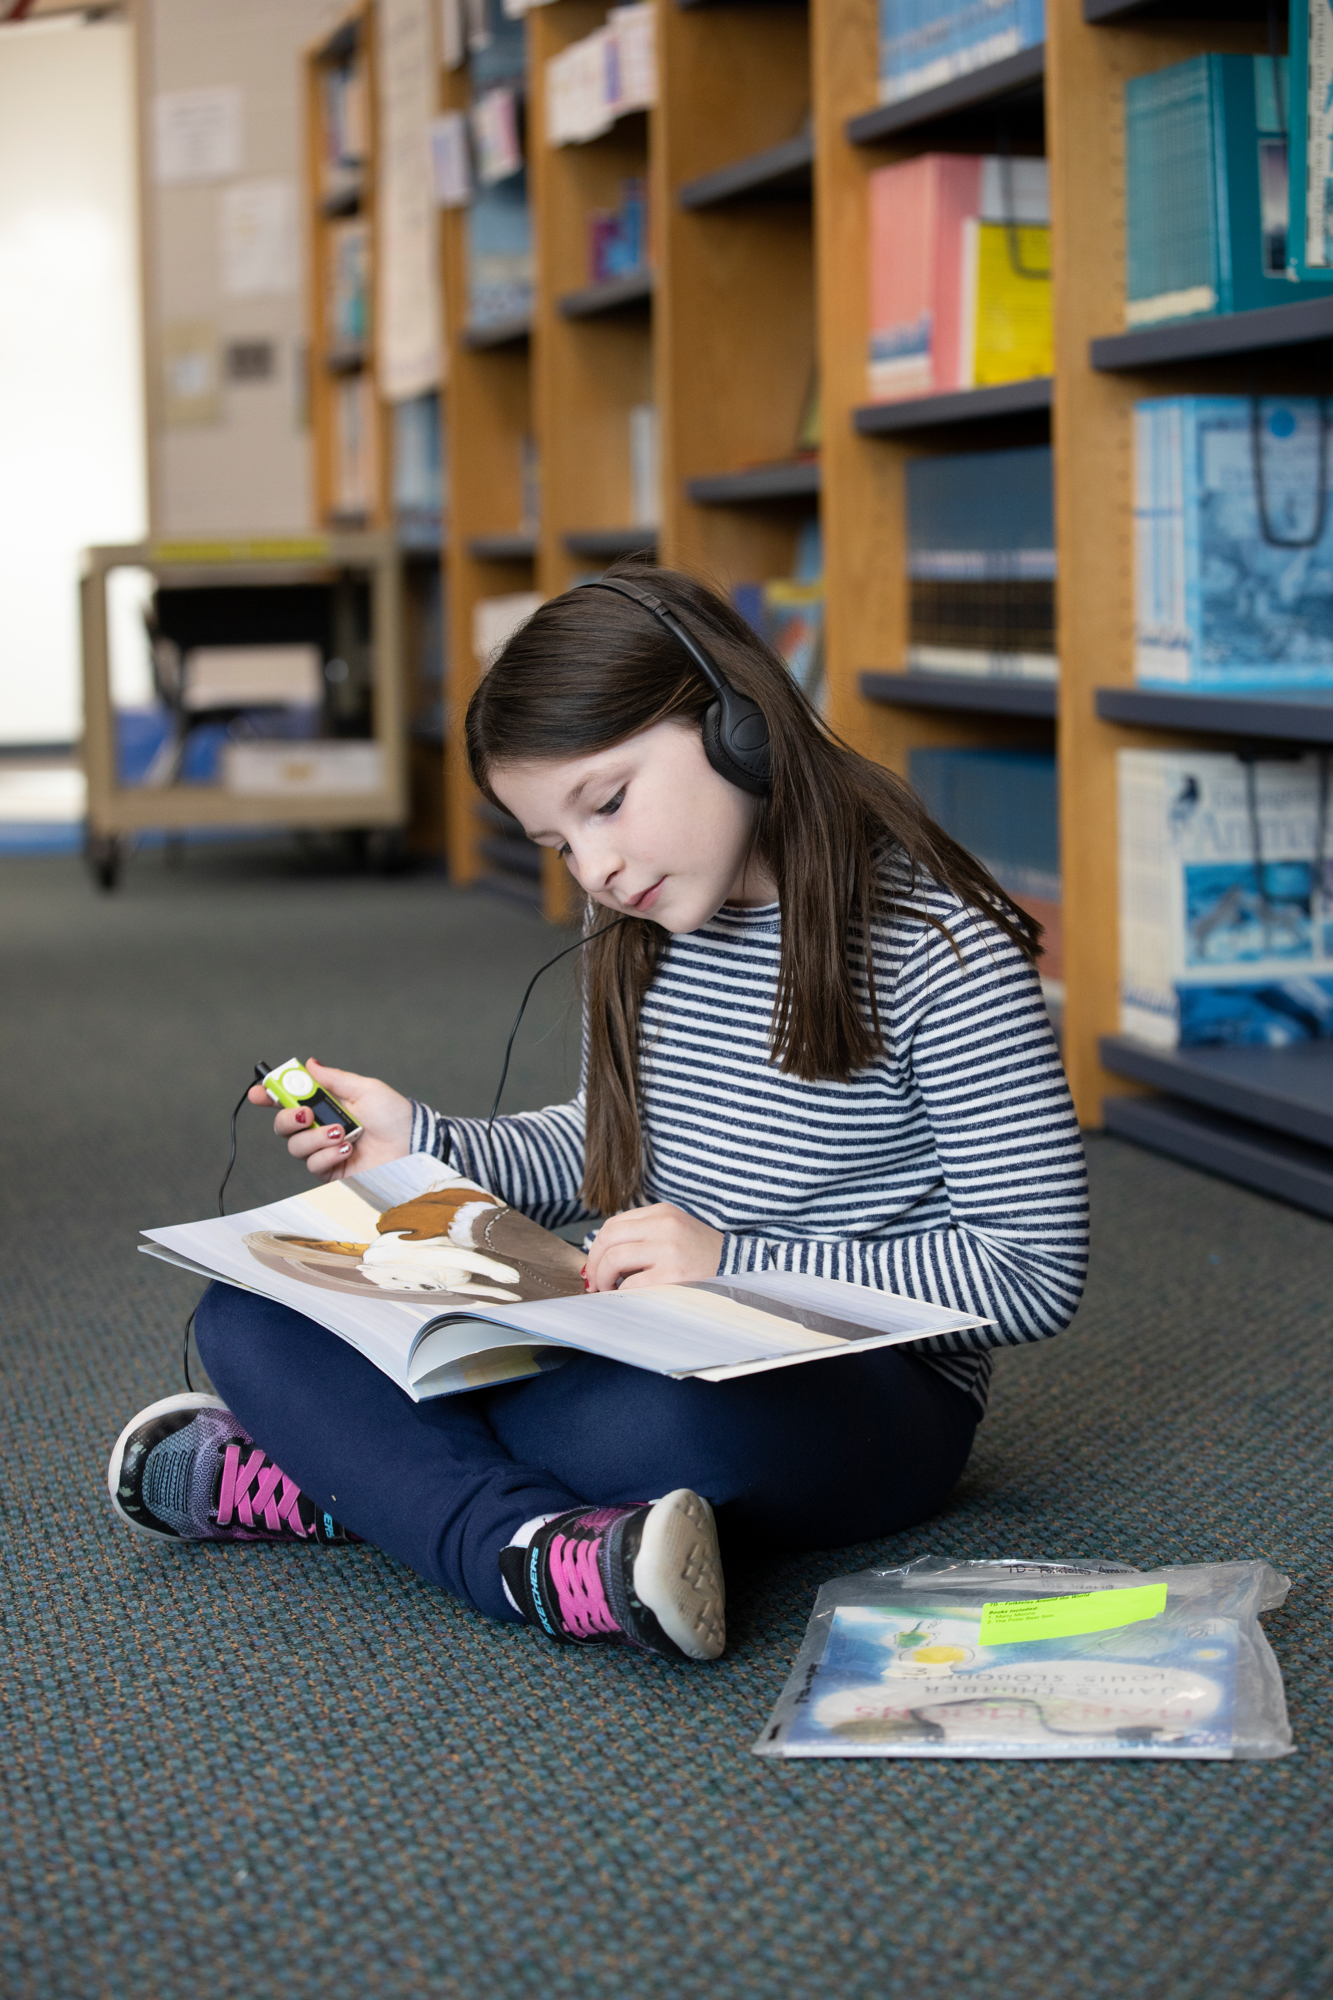 Ava-pictured-here-in-ERfCs-After-School-Center-is-listening-to-a-CRISKids-audio-book-on-an-MP3-player-while-following-along-in-the-print-version-of-the-book